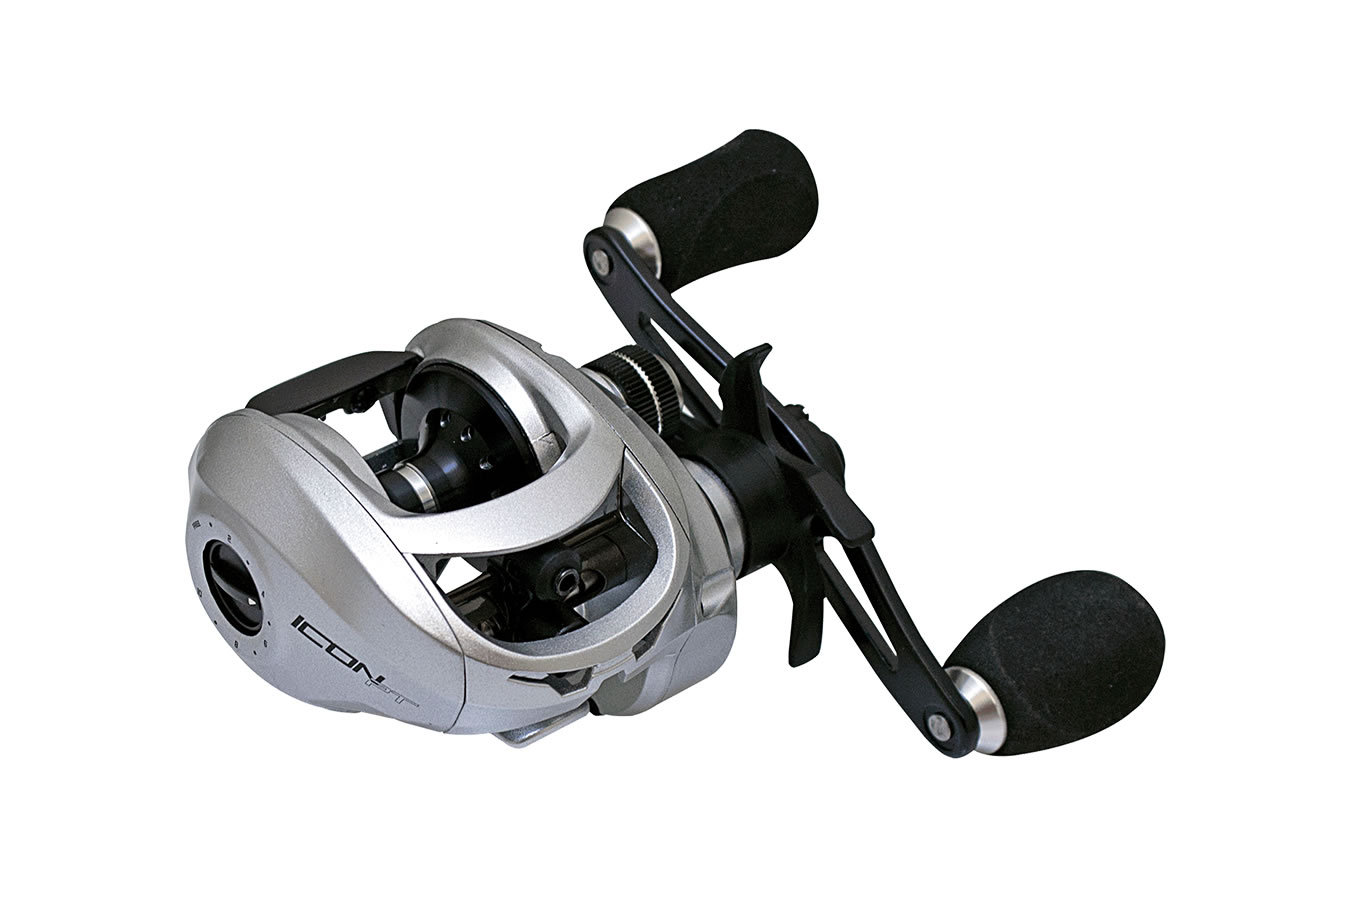 Discount Quantum Icon PT - Baitcasting Reel (7.0:1) Left Handed for Sale, Online Fishing Reels Store